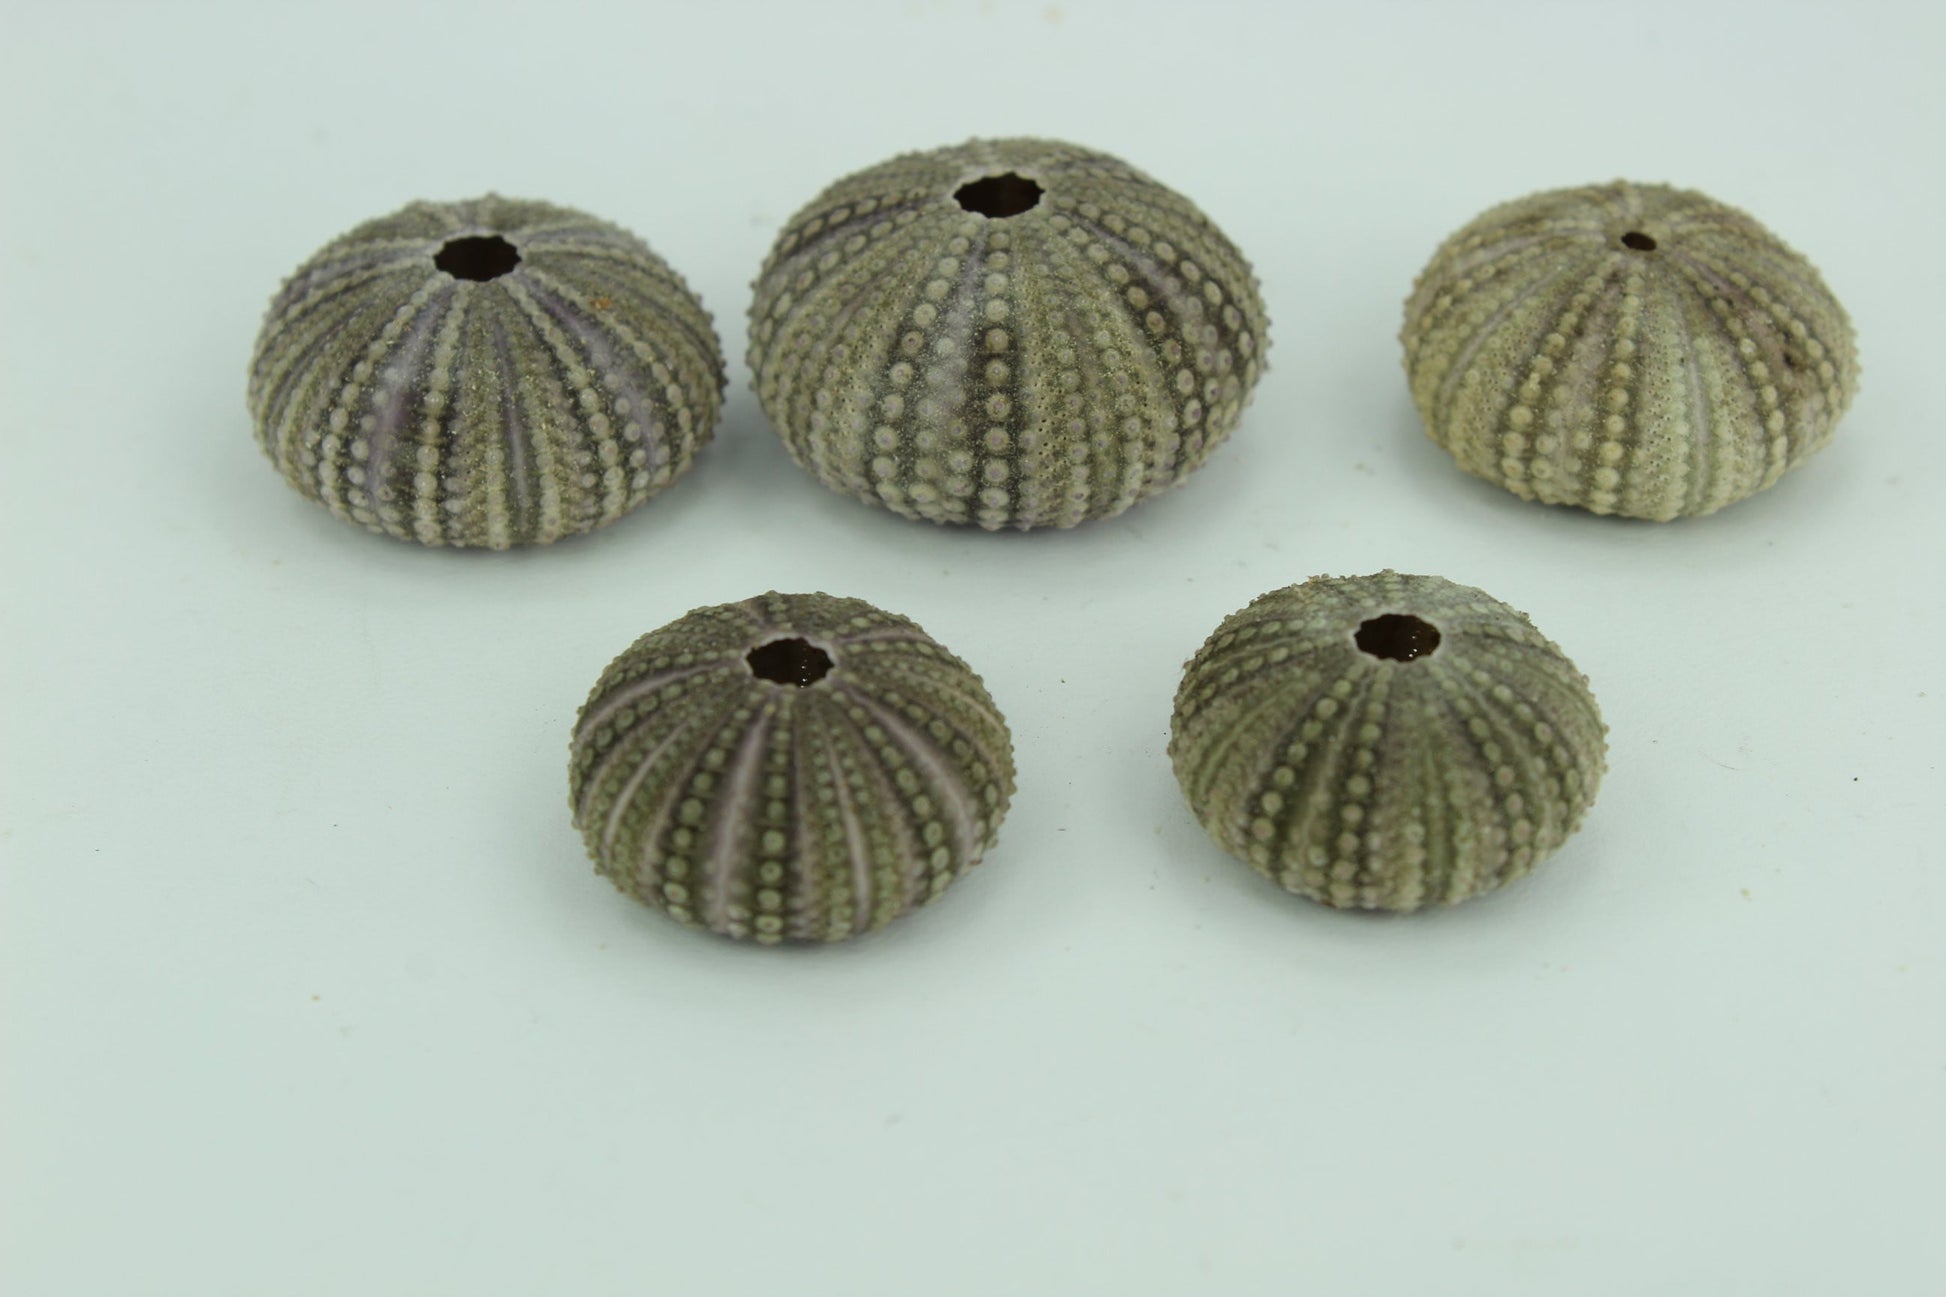 Florida Natural 5 Baby Sea Urchins Estate Collection Jewelry Shell Art Collectibles unusual